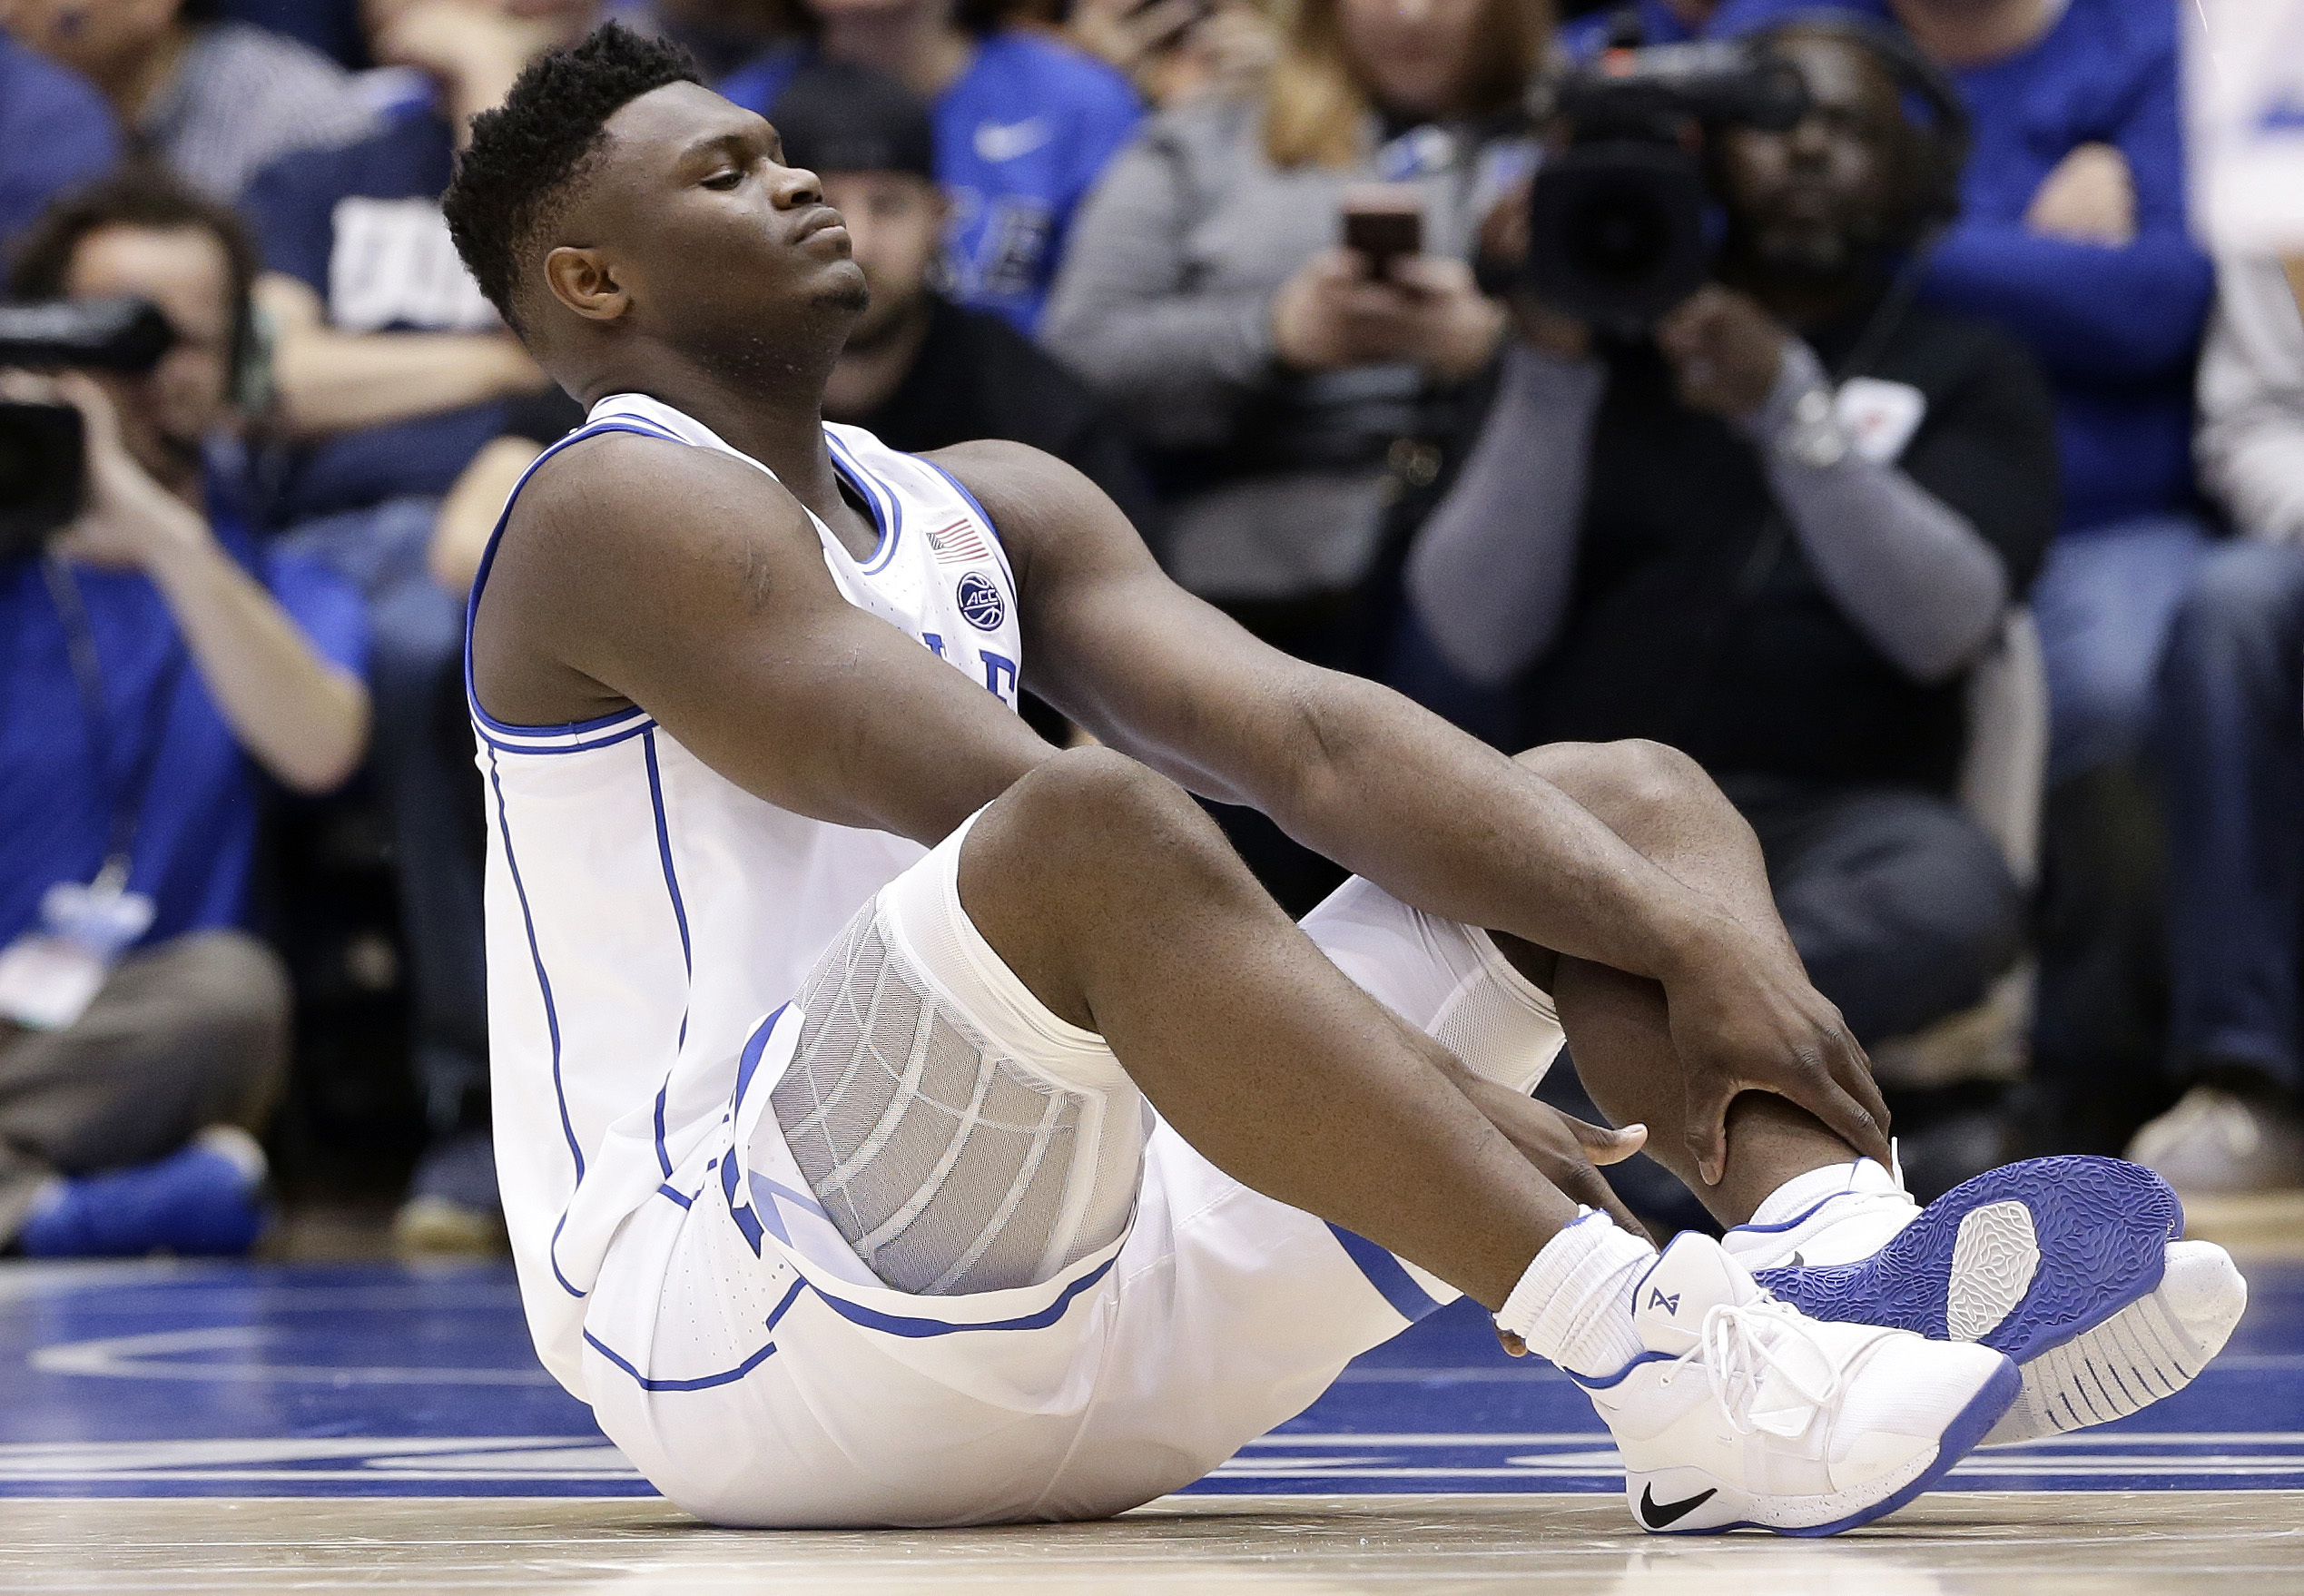 PHOTO: Duke's Zion Williamson sits on the floor following a injury during the first half of an NCAA college basketball game against North Carolina in Durham, N.C., Wednesday, Feb. 20, 2019.